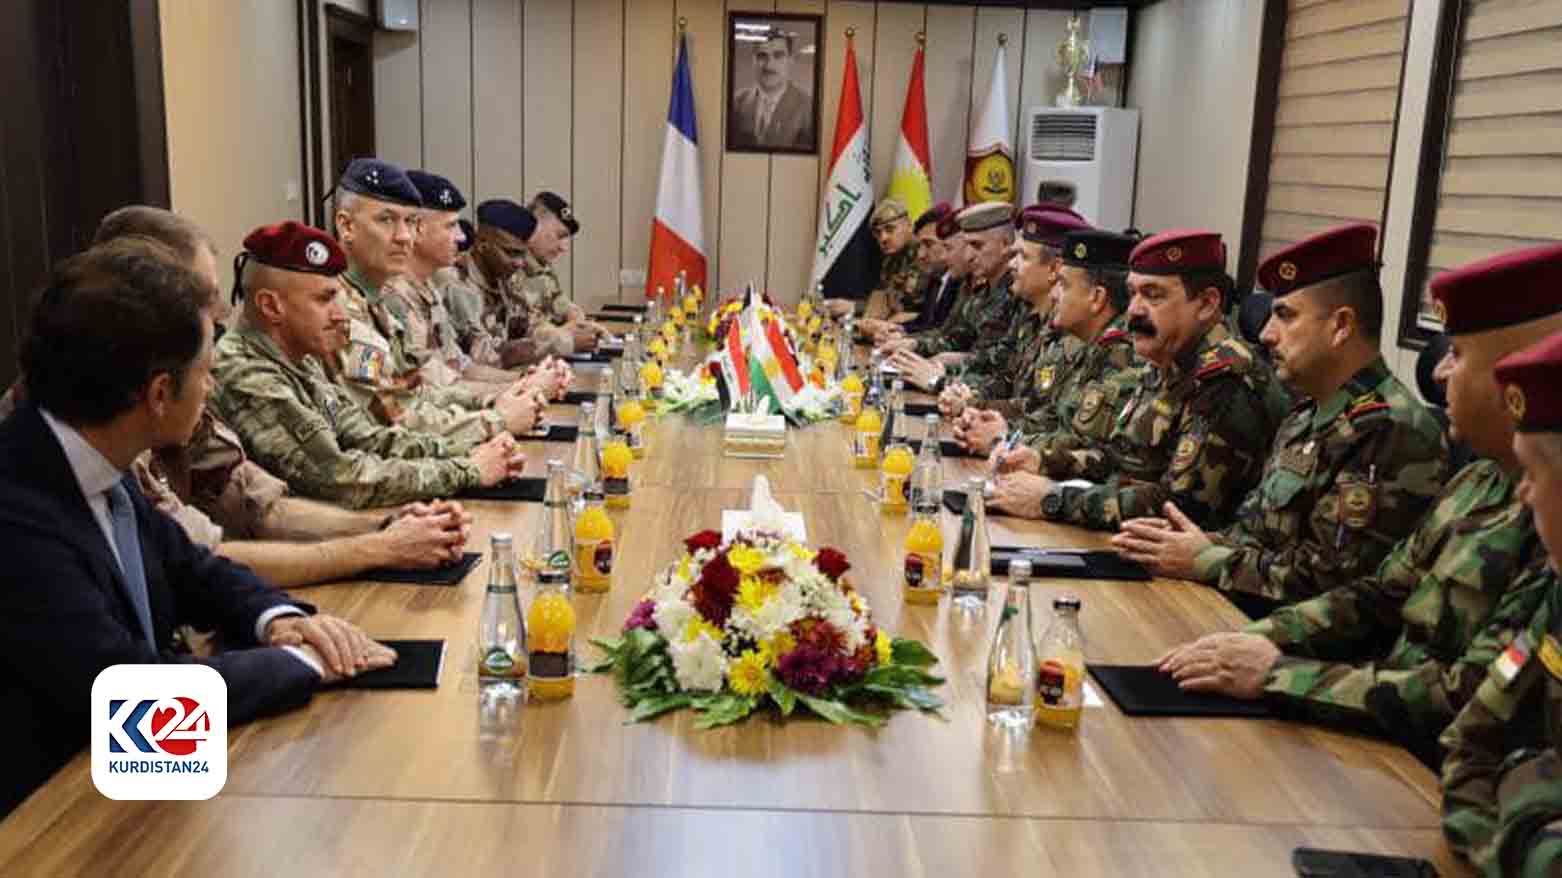 The meeting of the senior Peshmerga (right) and French military officials, Dec. 23, 2023. (Photo: KRG Ministry of Peshmerga Affairs)